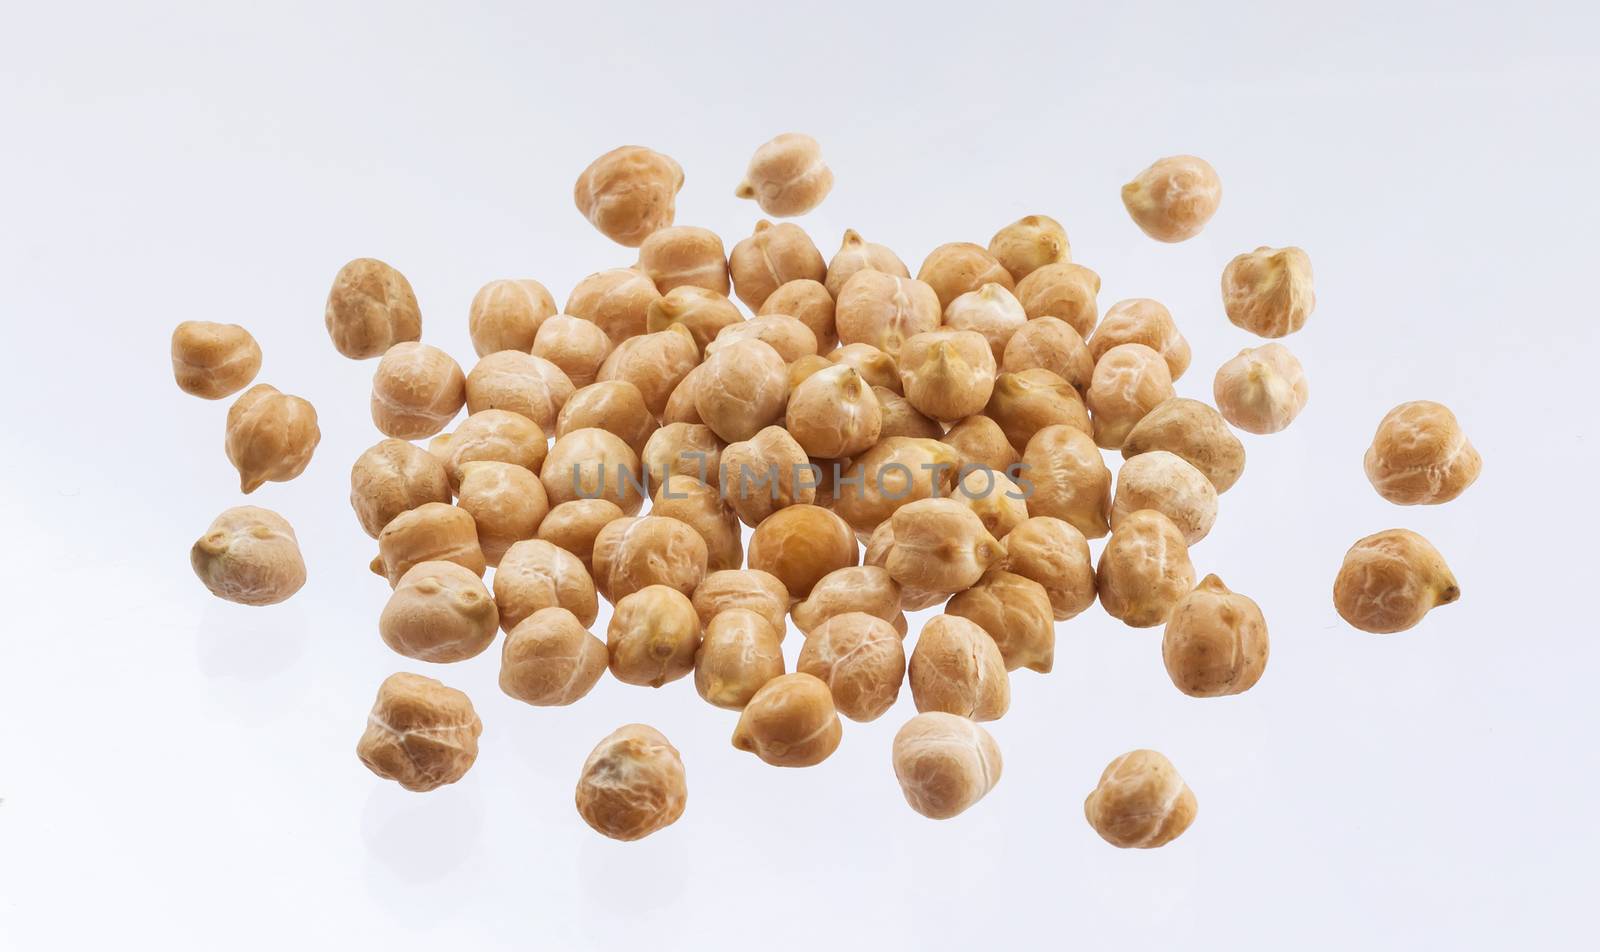 Heap of chickpeas isolated on white background